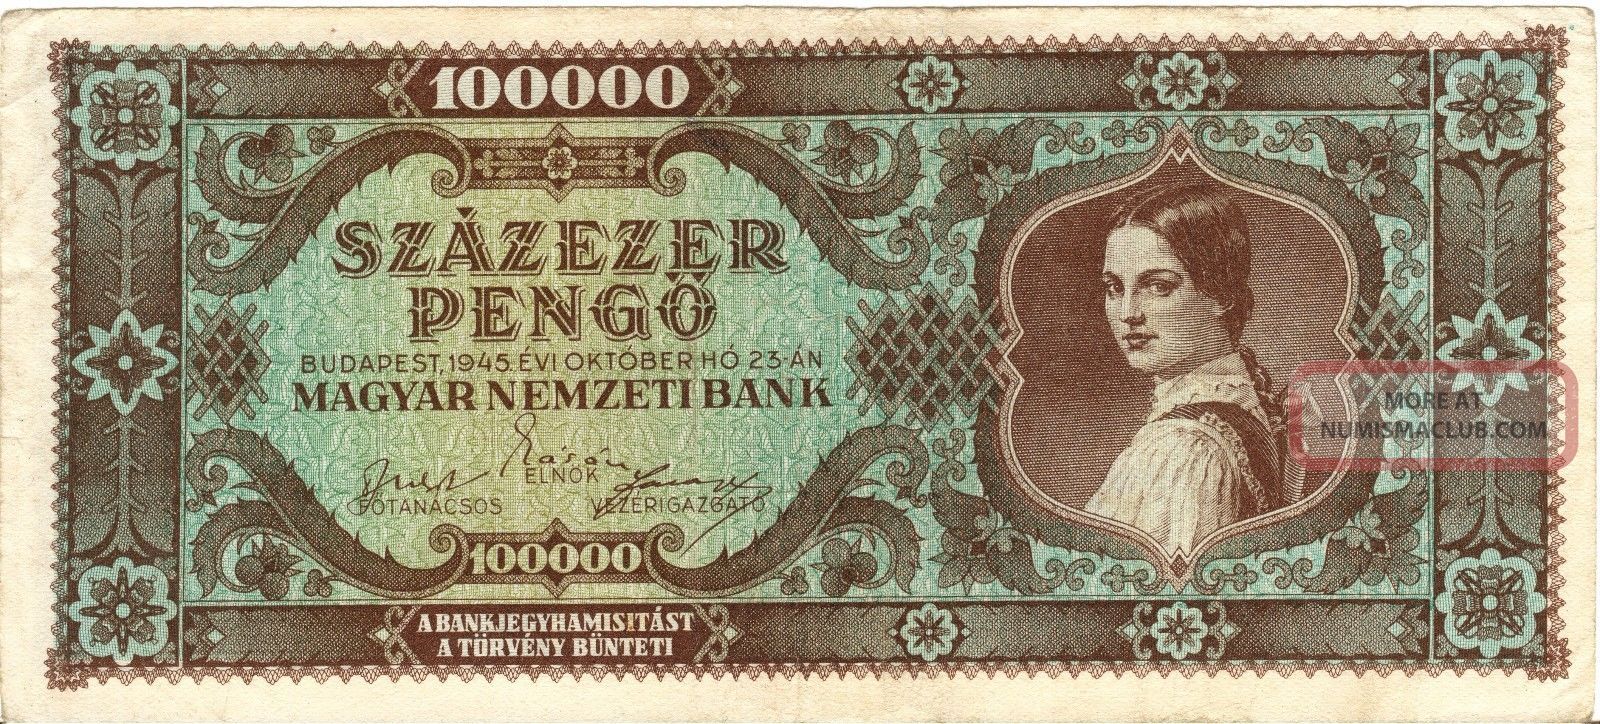 Hungarian Monarchy Inflation Banknote,  100000 Pengö,  Not Circulated Europe photo